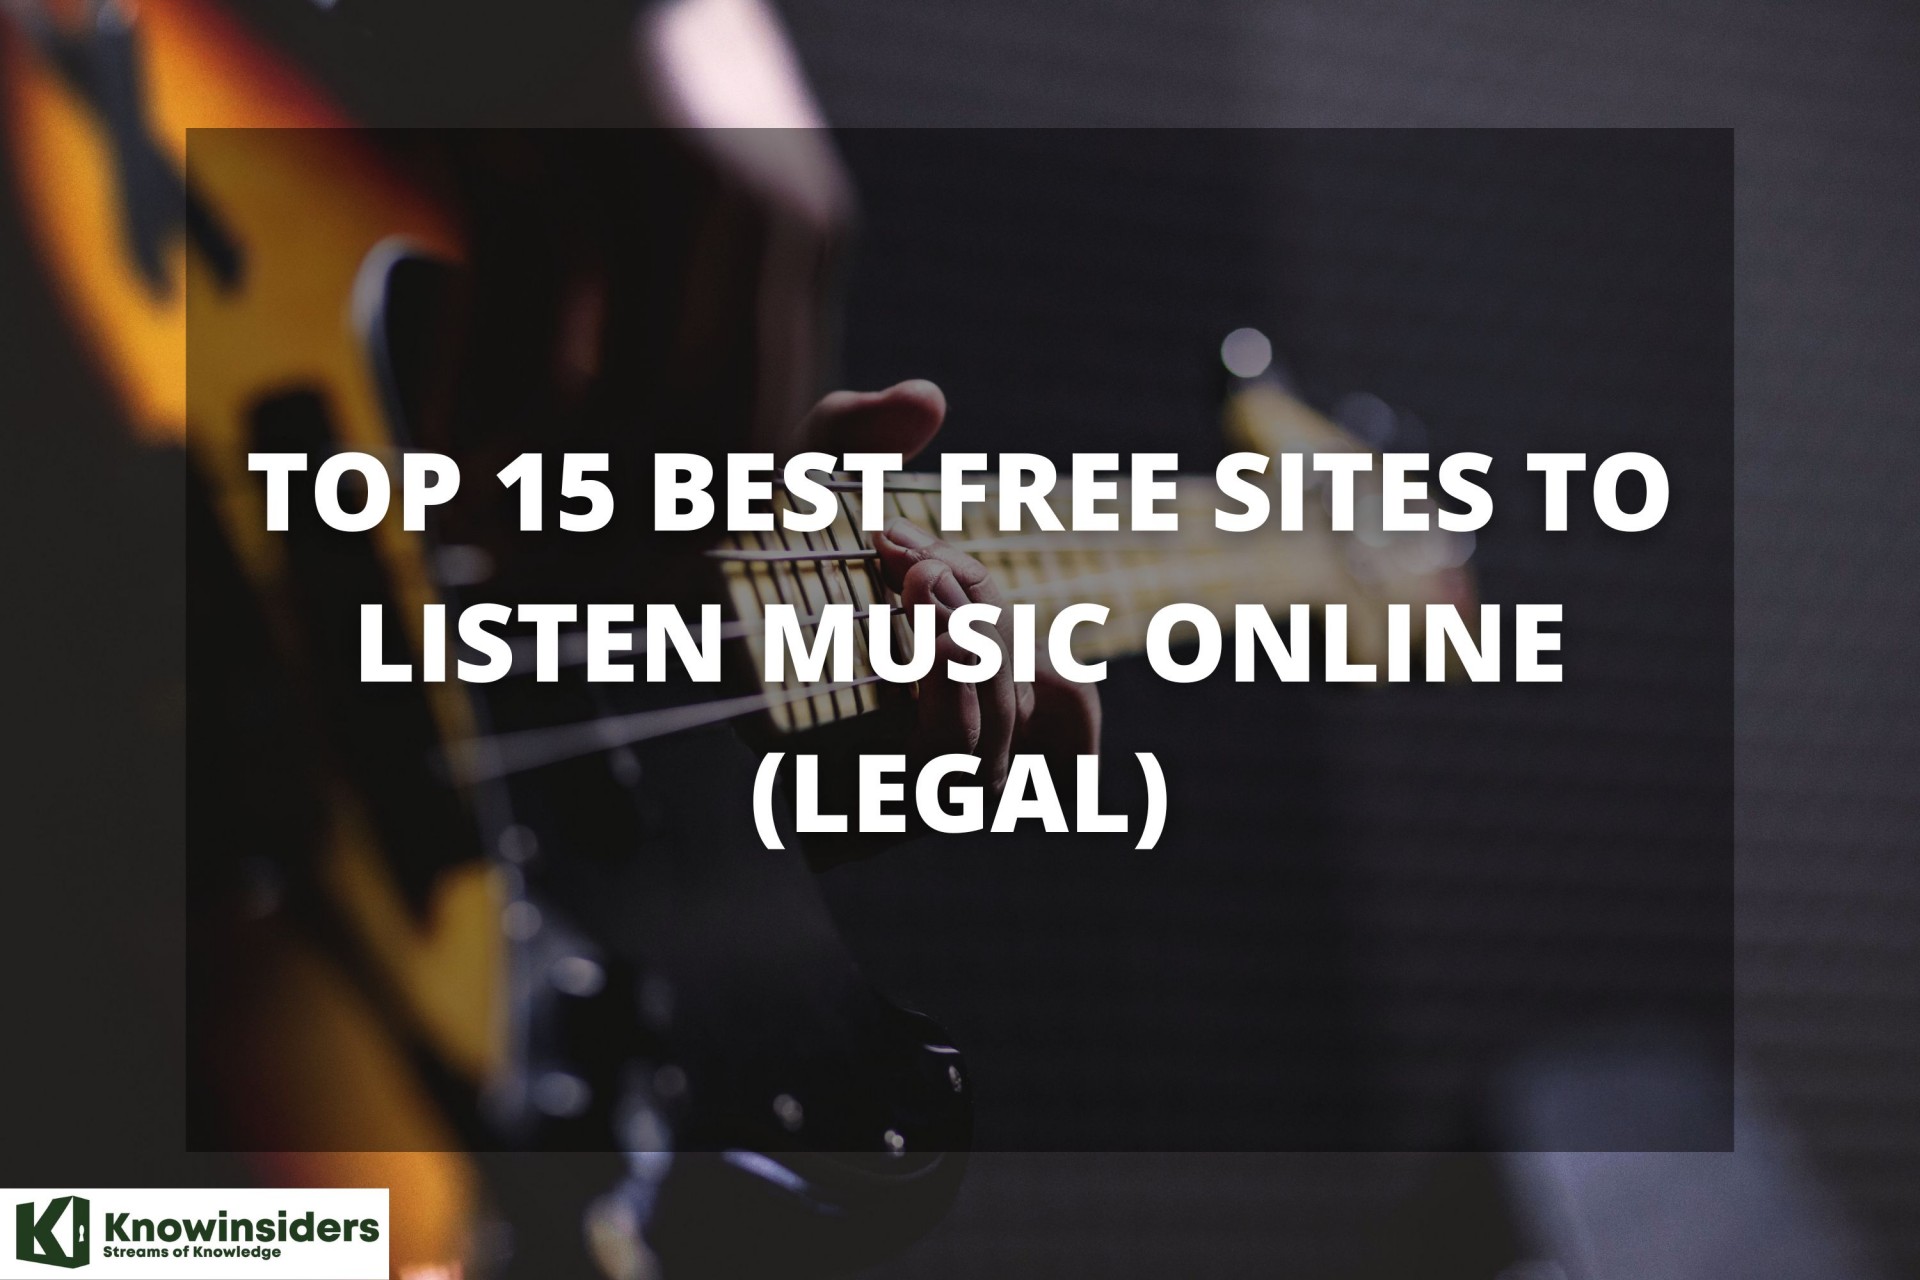 Top 15 Best Free Sites to Listen Music Online (Legal)